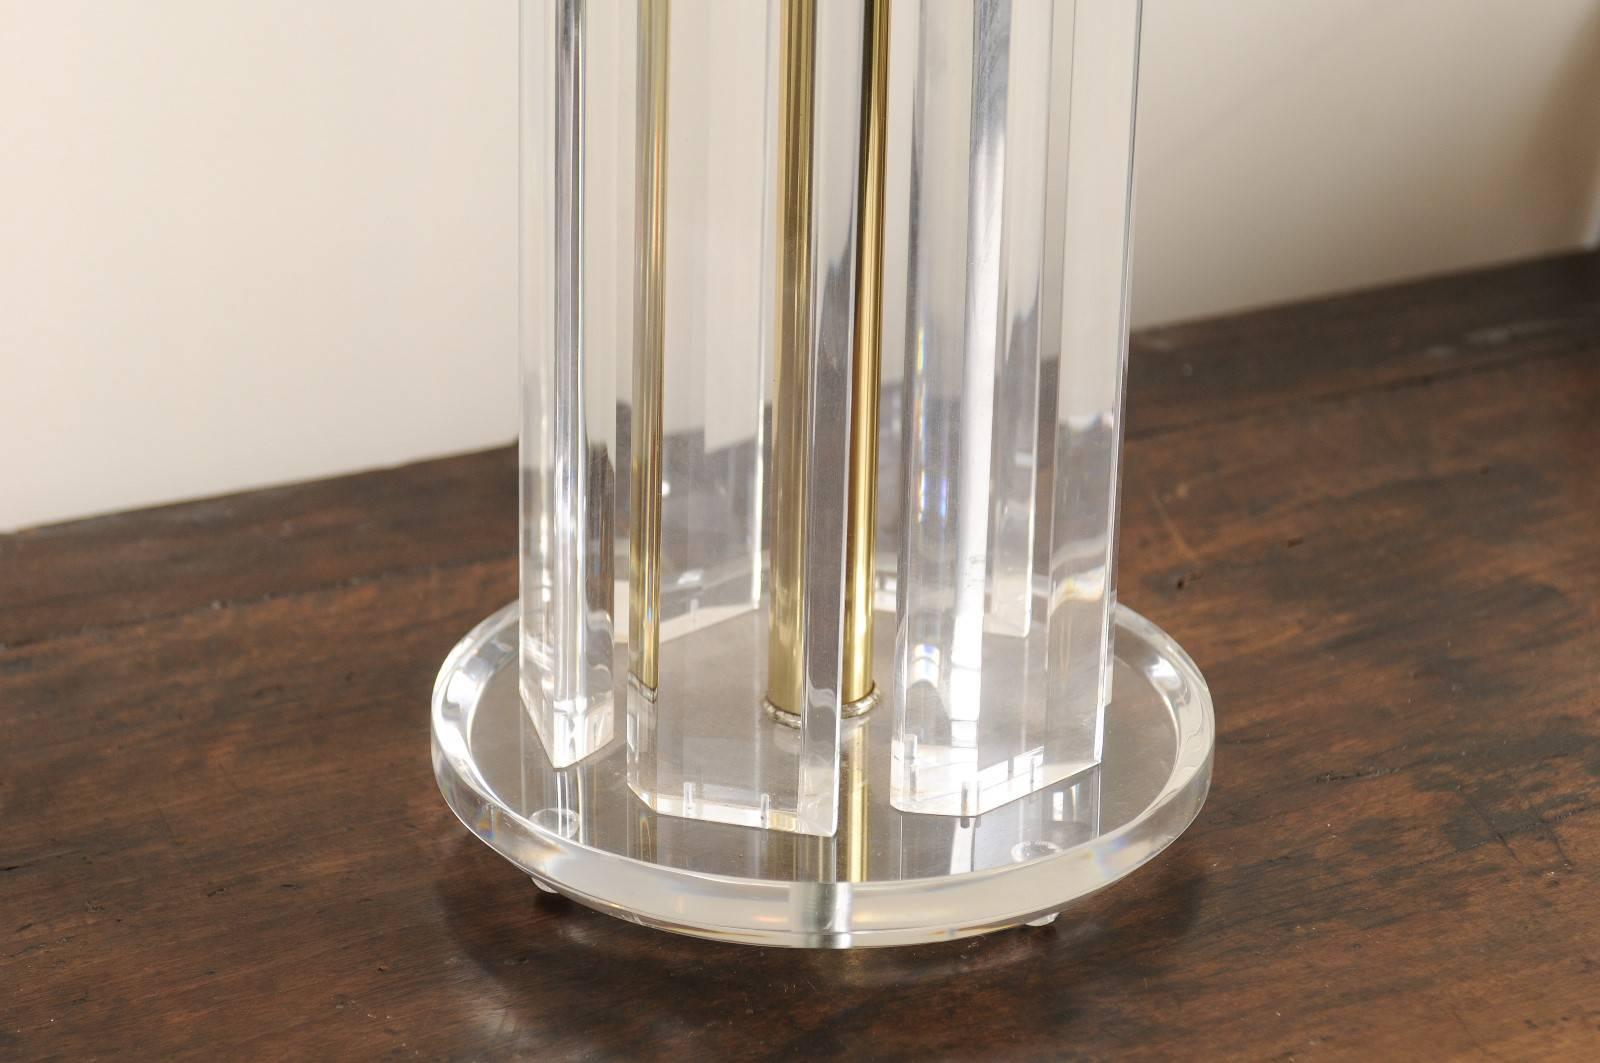 Pair of Lucite Mid-20th Century Table Lamps with Round Shape and Gold Tones 3